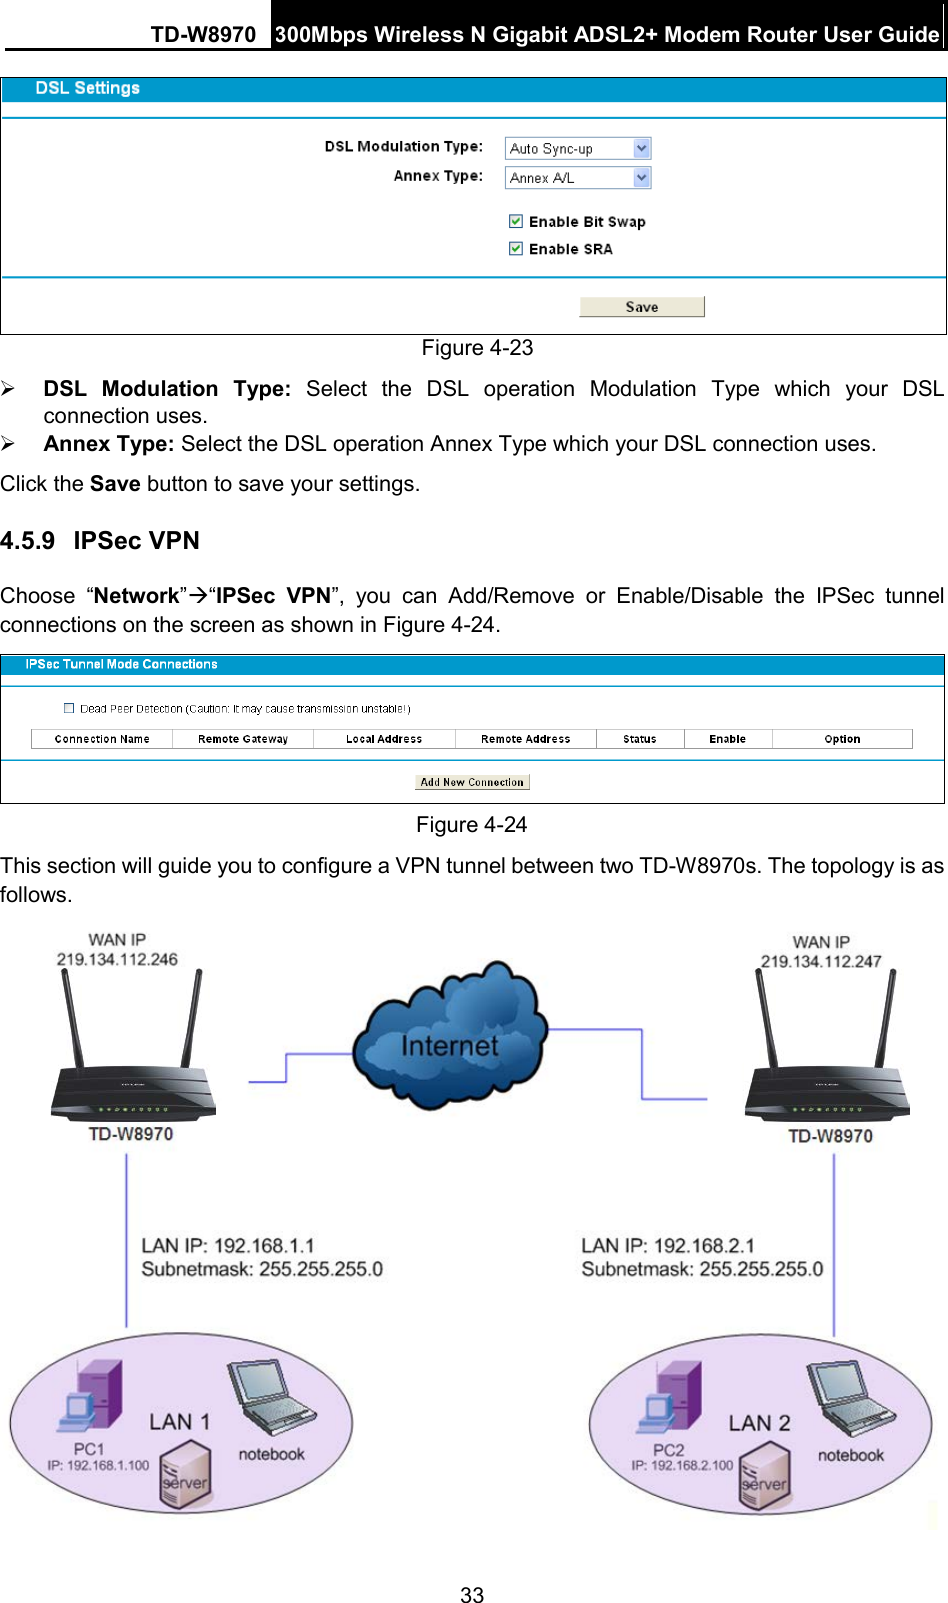 TD-W8970 300Mbps Wireless N Gigabit ADSL2+ Modem Router User Guide   Figure 4-23  DSL Modulation Type:  Select the DSL operation Modulation  Type which your DSL connection uses.  Annex Type: Select the DSL operation Annex Type which your DSL connection uses. Click the Save button to save your settings. 4.5.9 IPSec VPN Choose “Network”“IPSec VPN”, you can Add/Remove or Enable/Disable the IPSec tunnel connections on the screen as shown in Figure 4-24.    Figure 4-24 This section will guide you to configure a VPN tunnel between two TD-W8970s. The topology is as follows.    33 